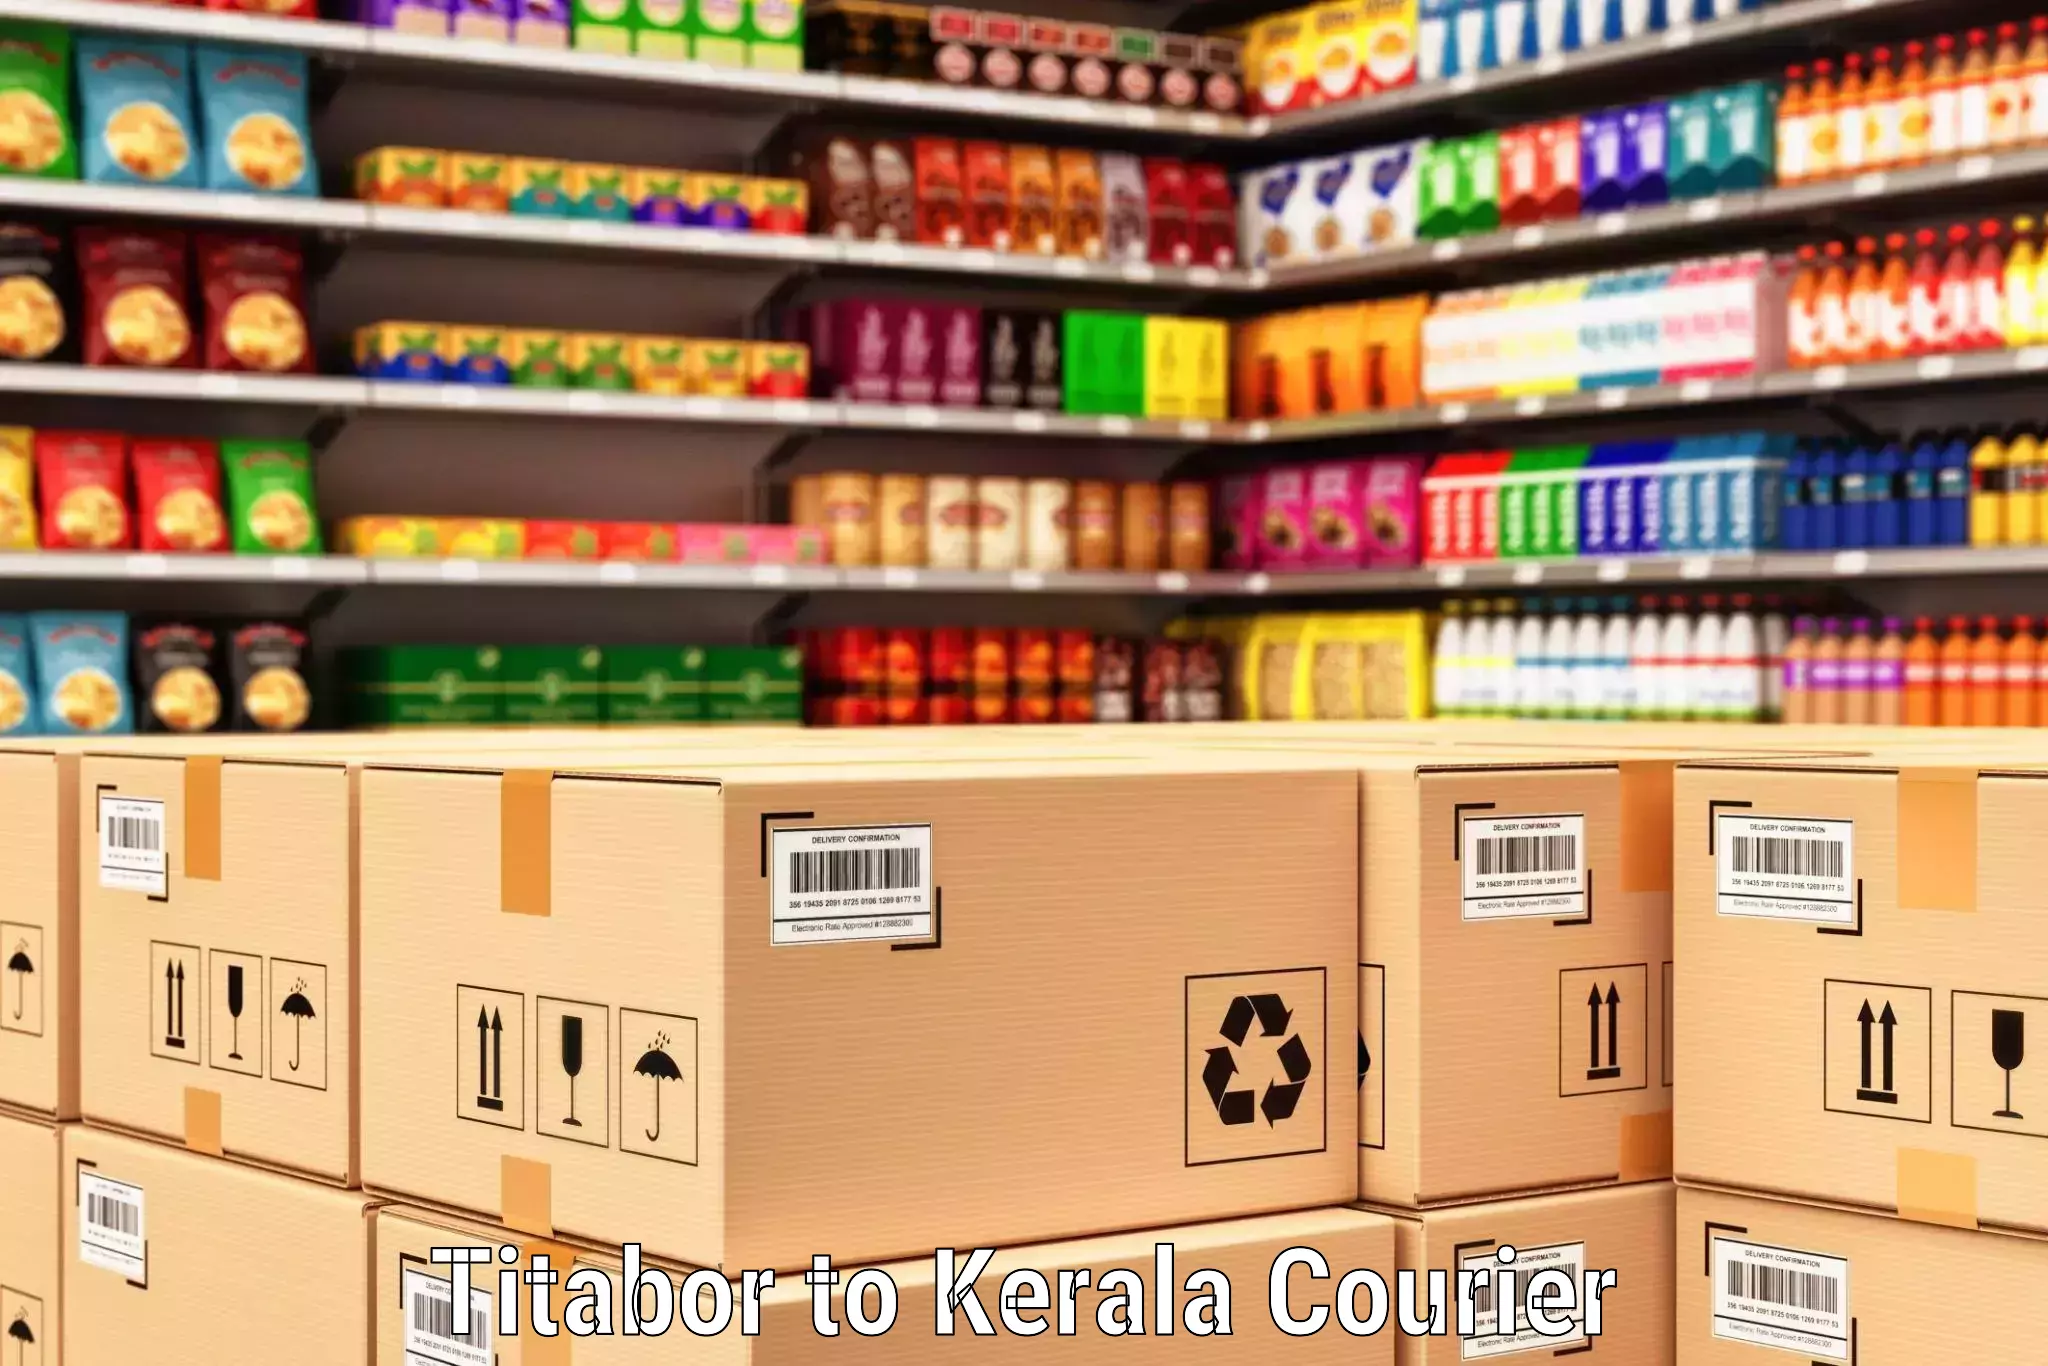 Local delivery service Titabor to Kerala